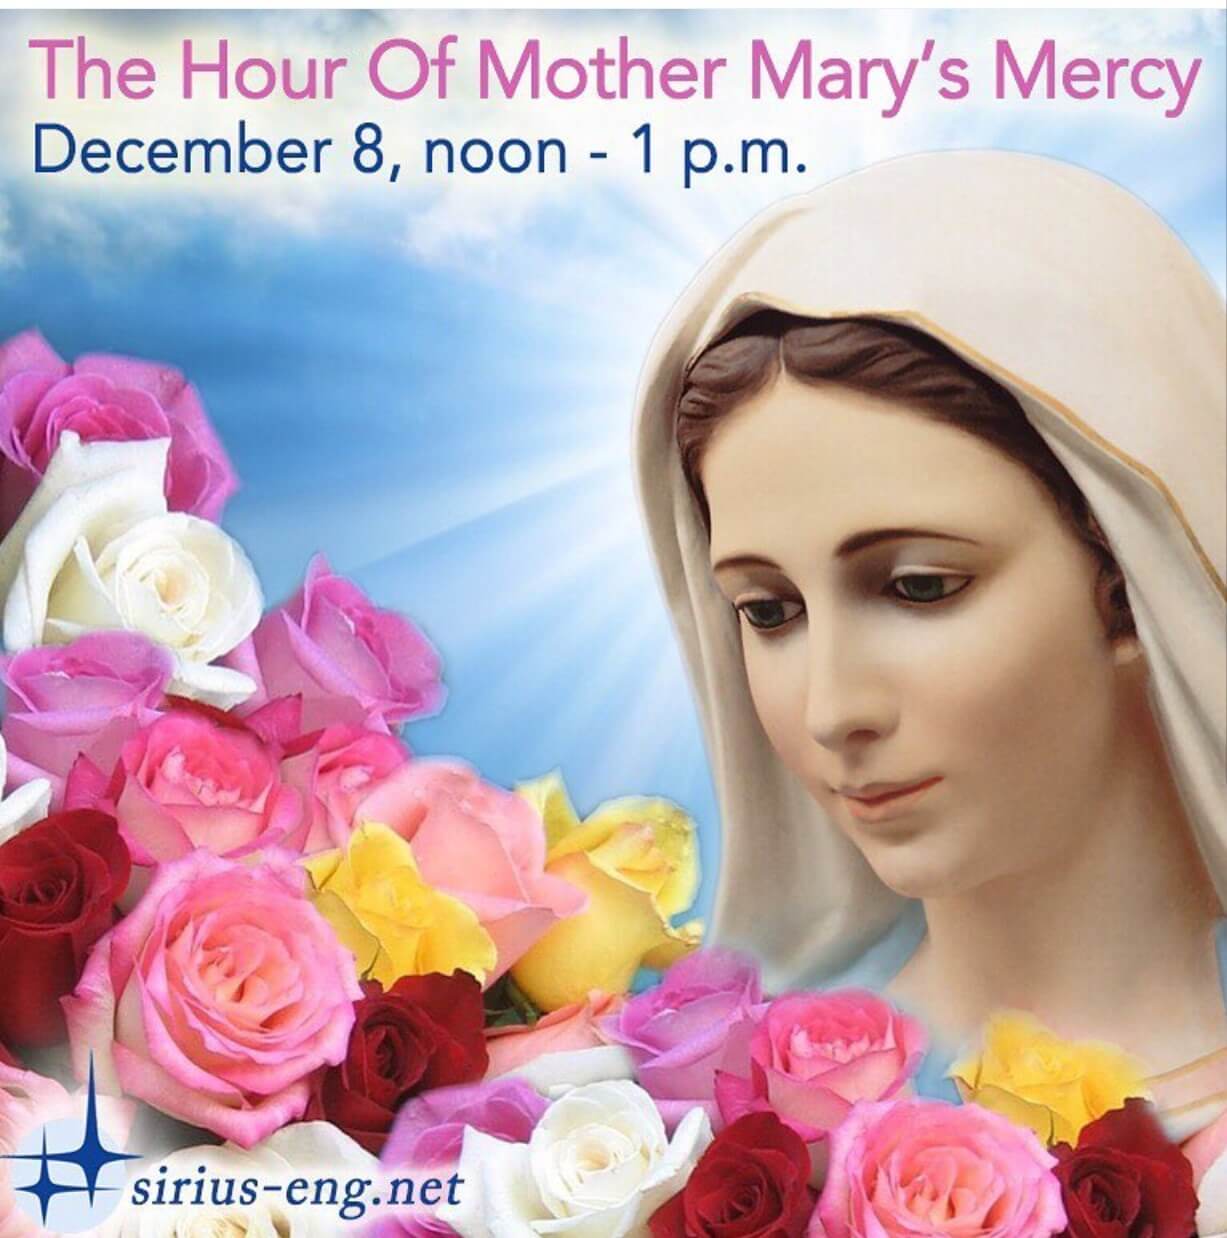 ABOUT MOTHER MARY’S HOUR OF MERCY